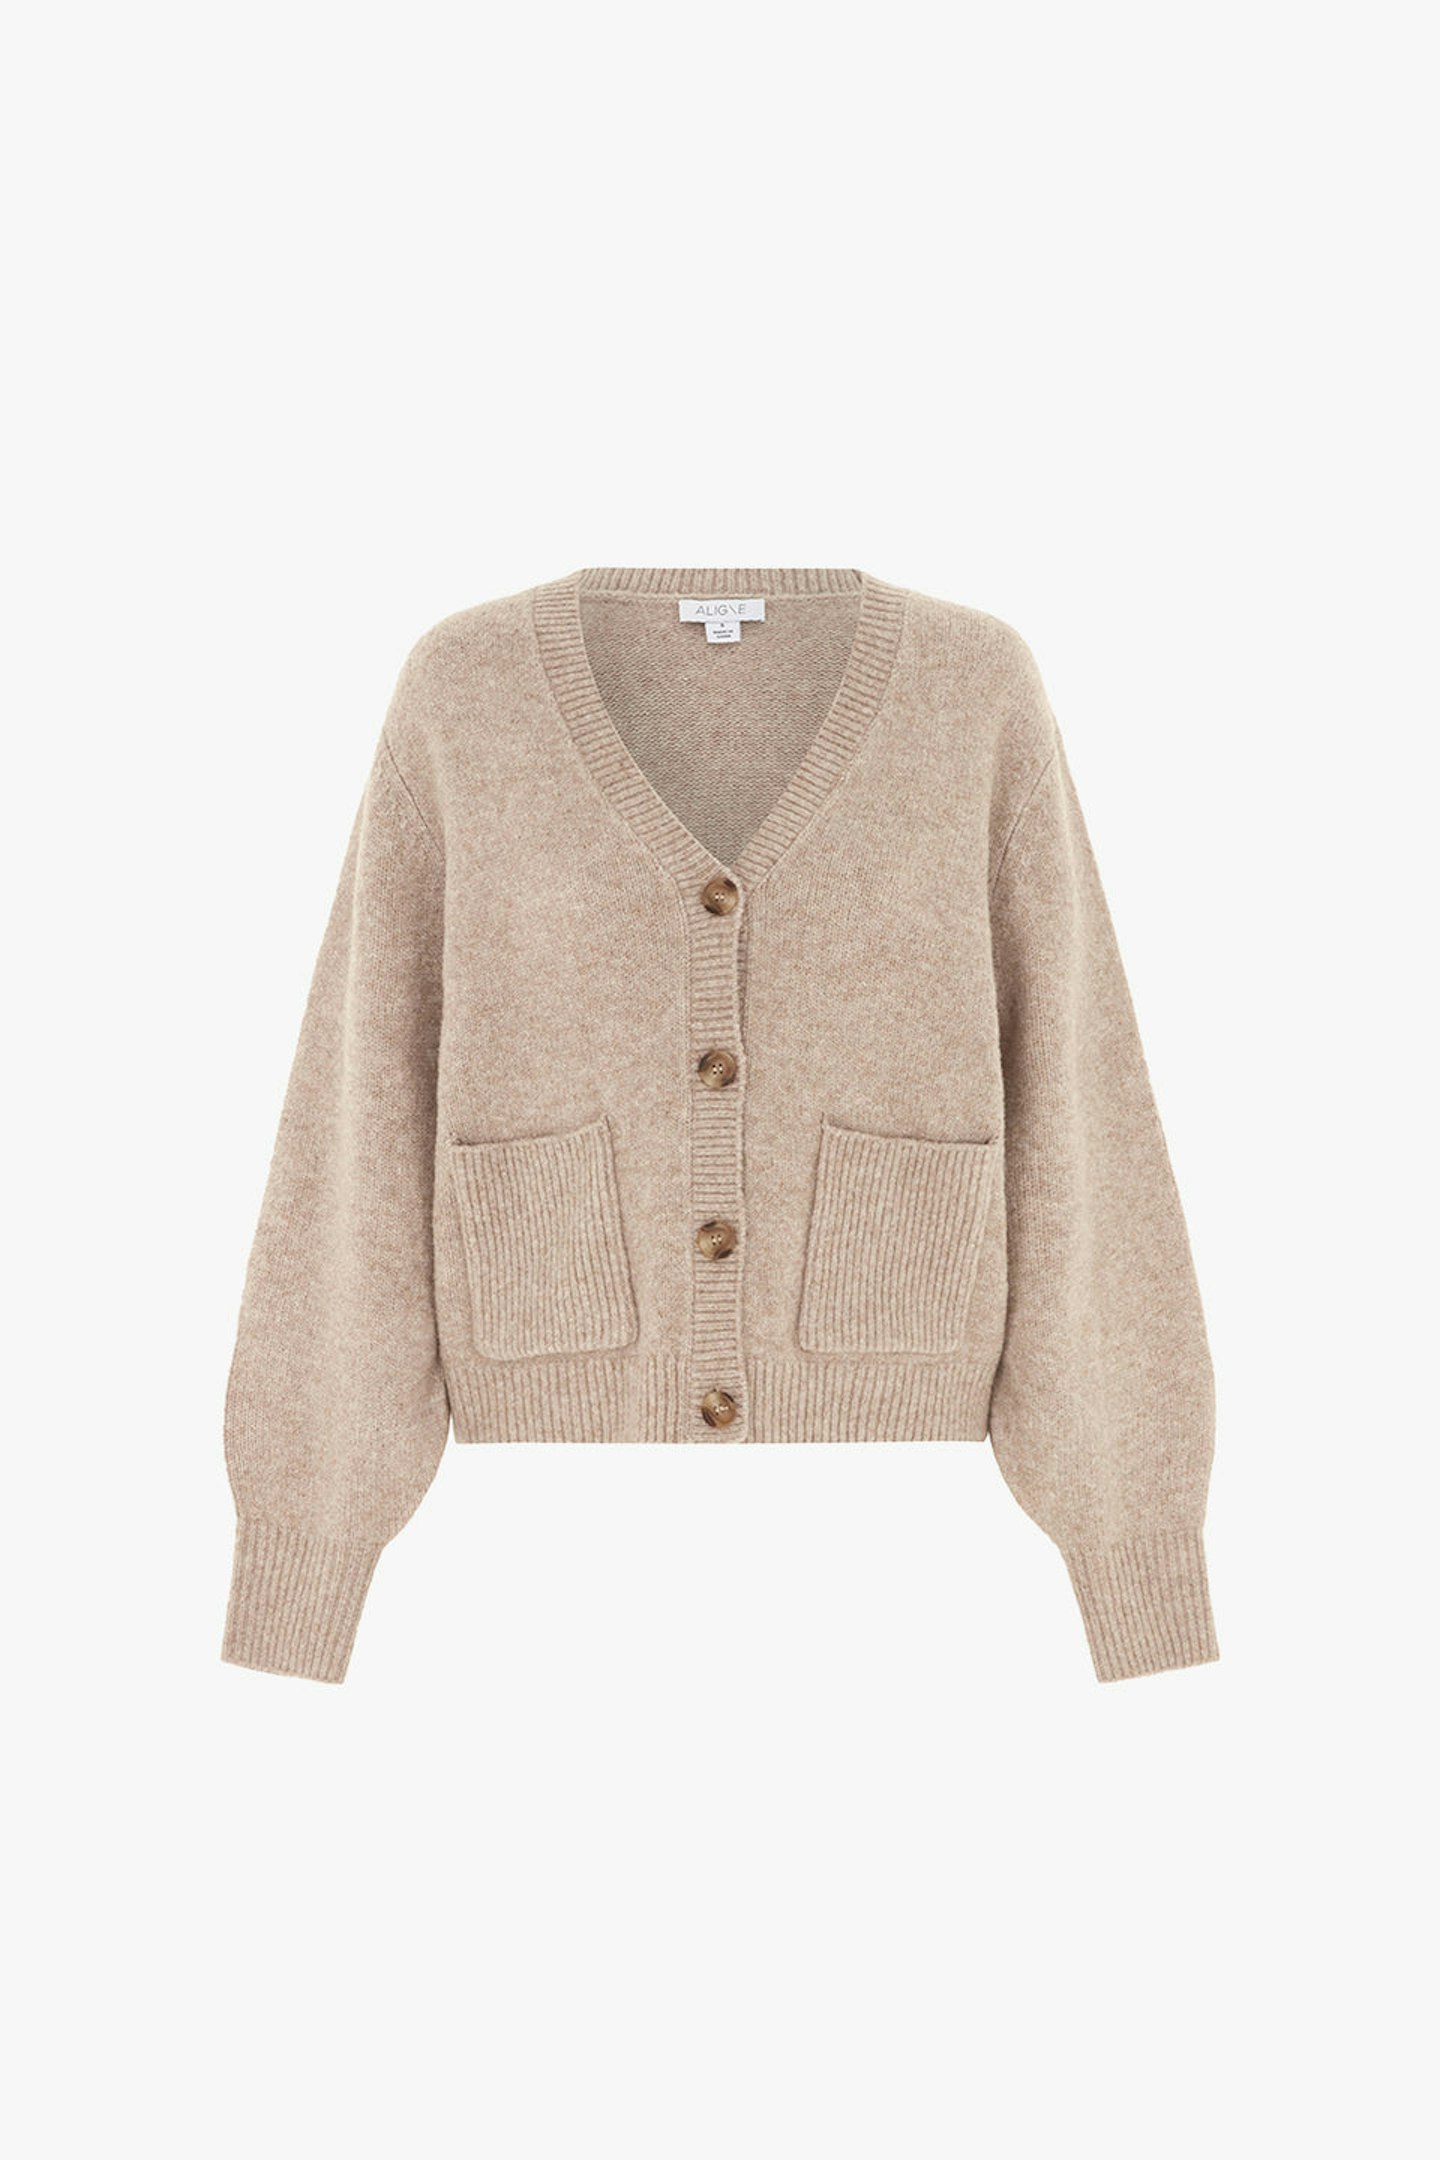 The Best Cardigans For Women Now That They're Cool Again